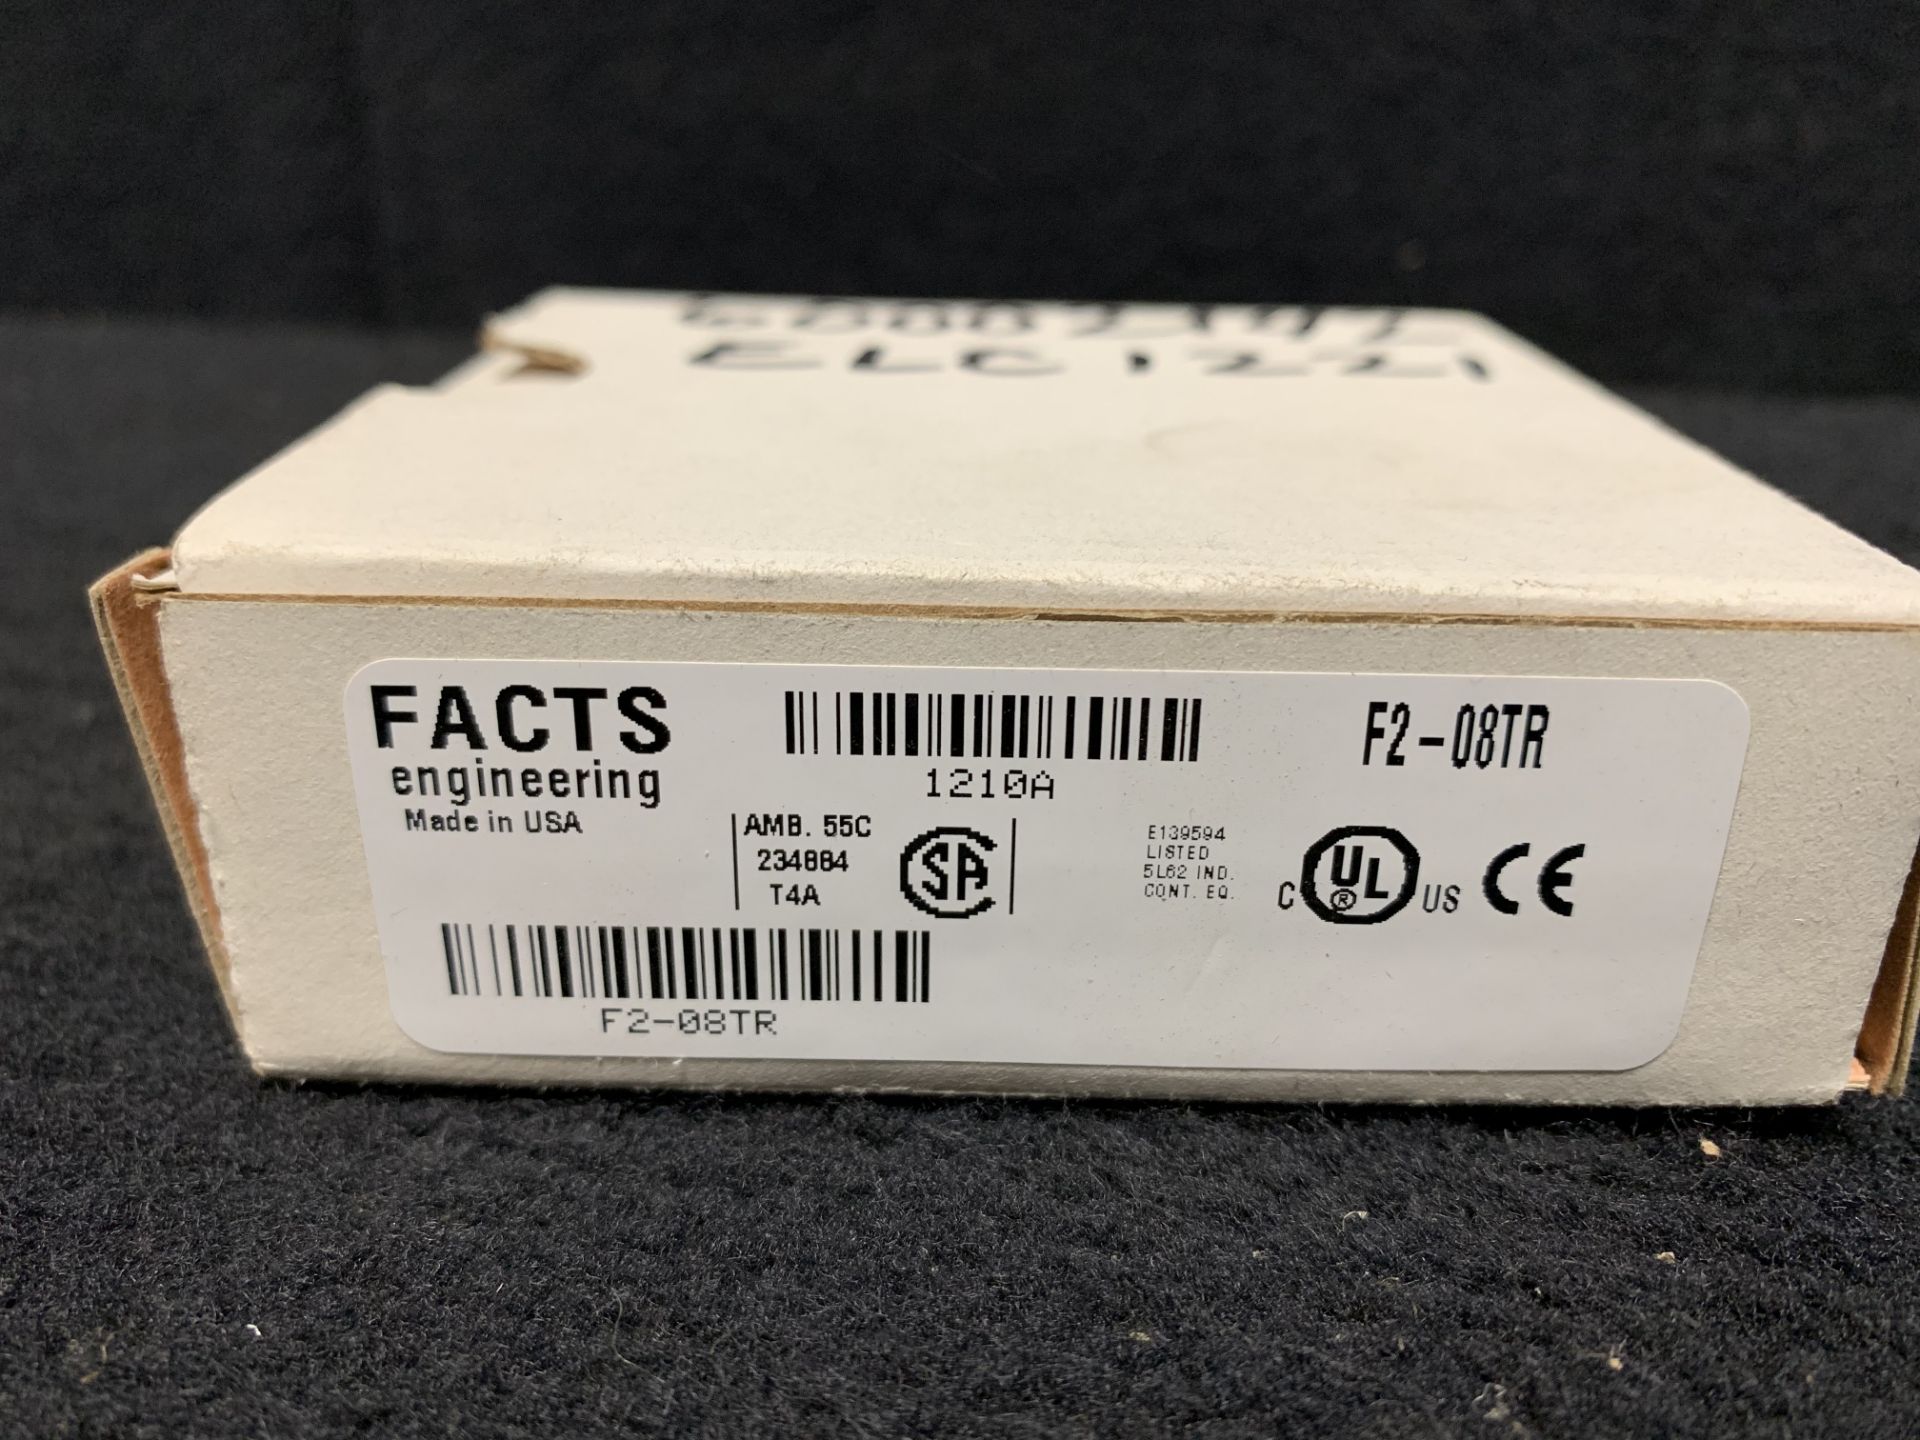 NEW IN BOX - PULS UBC10.241 DC-UPS CONTROL UNIT 24V, 10A |NEW OUT OF BOX - FACTS ENGINEERING F2-08TR - Image 5 of 7